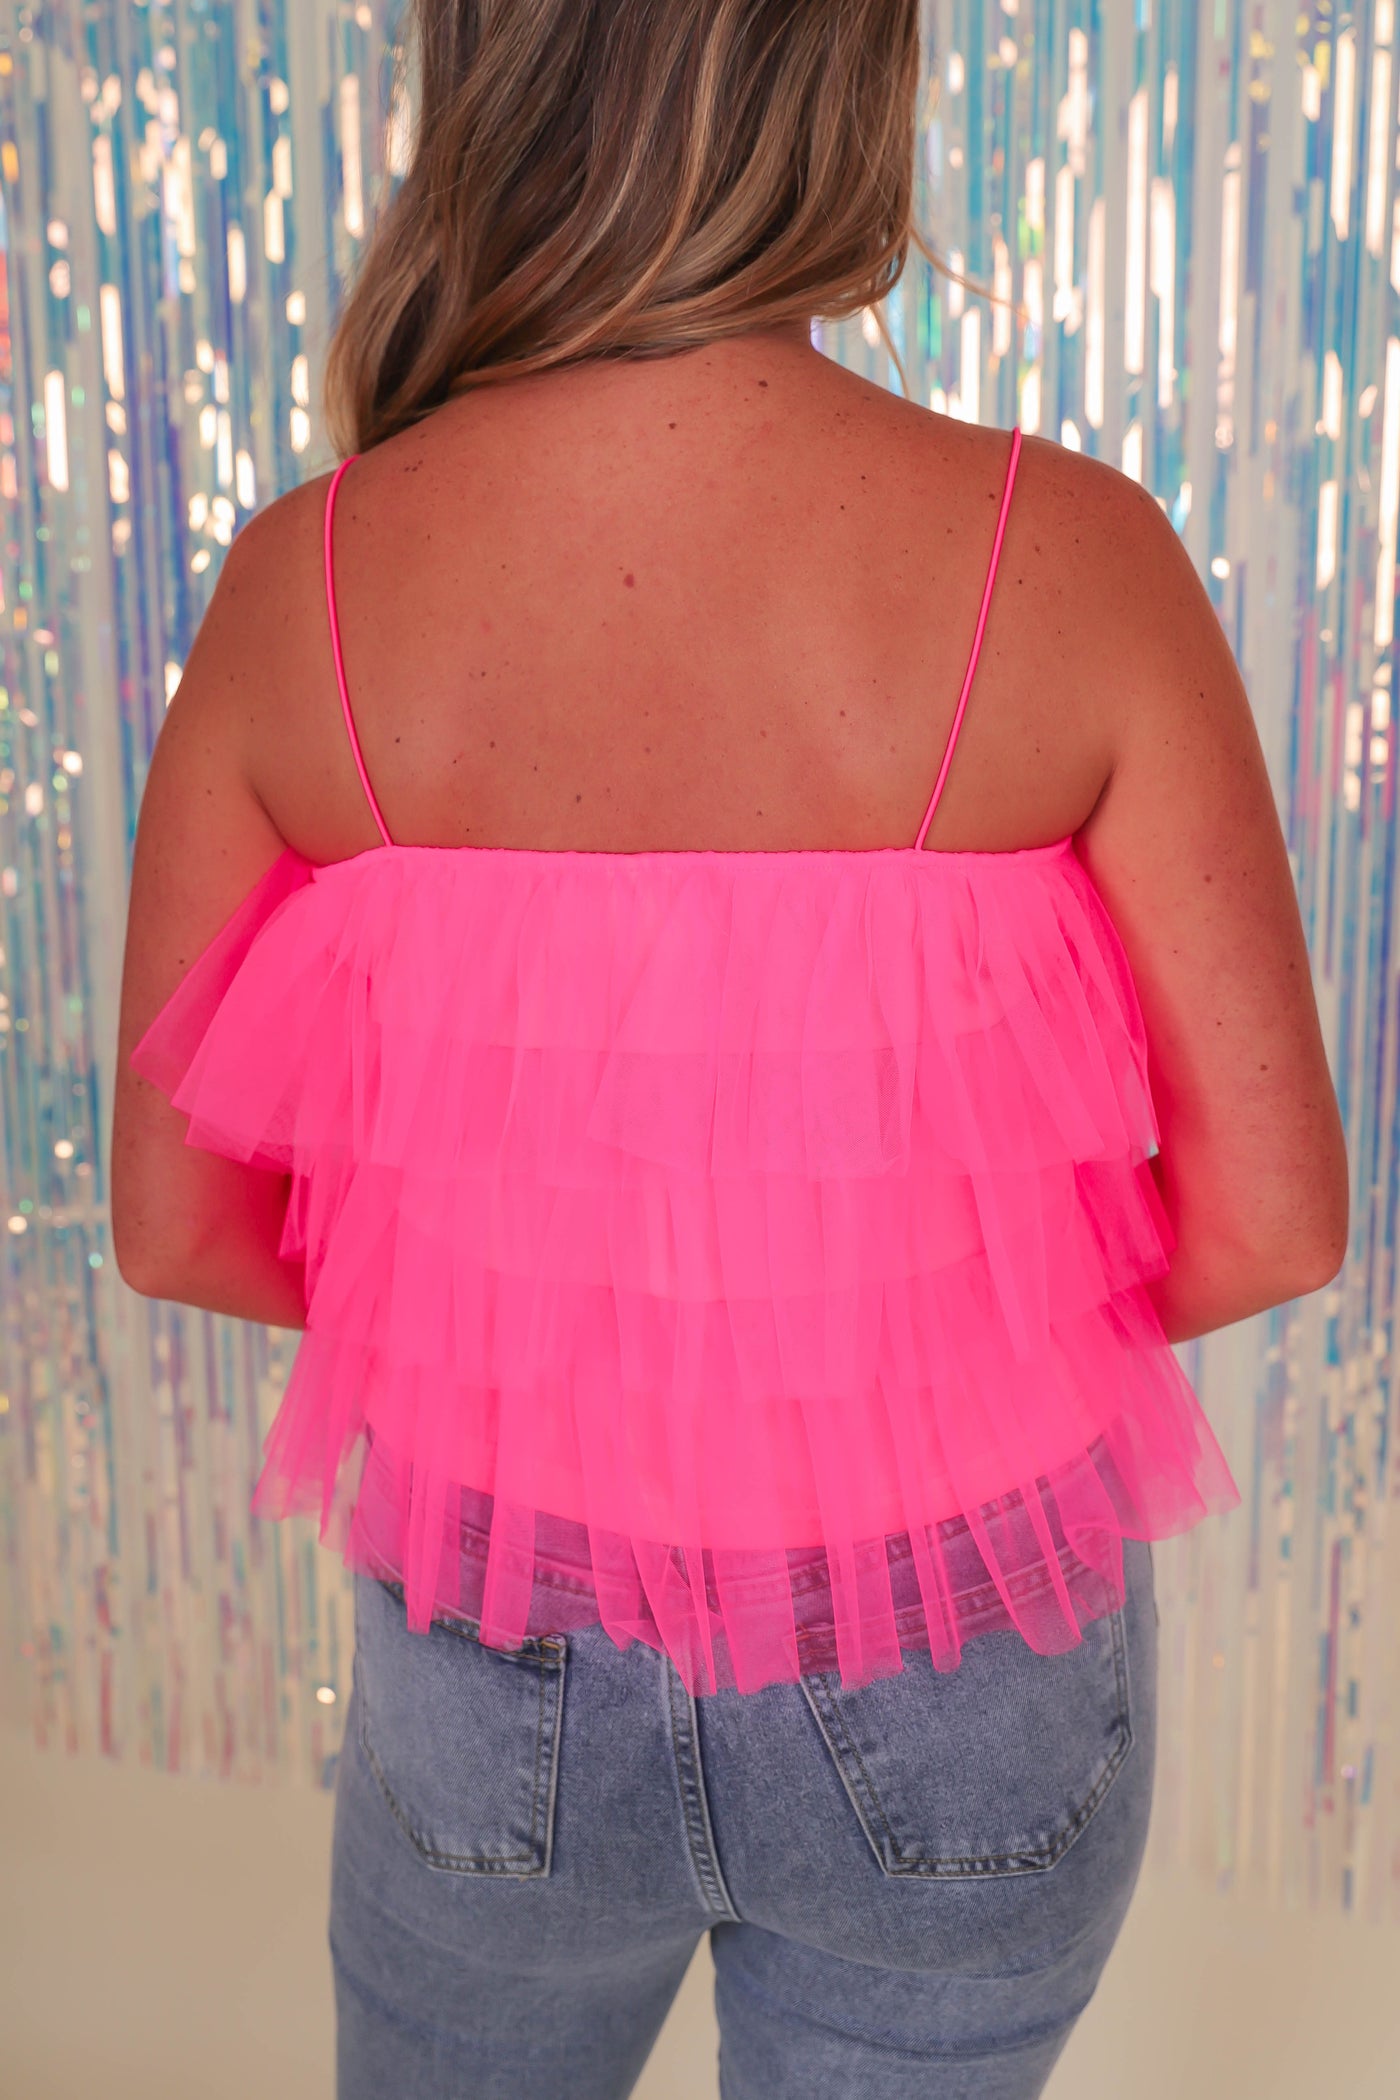 Neon Pink Tulle Top- Women's Fun Tulle Top- GLAM Pink Top